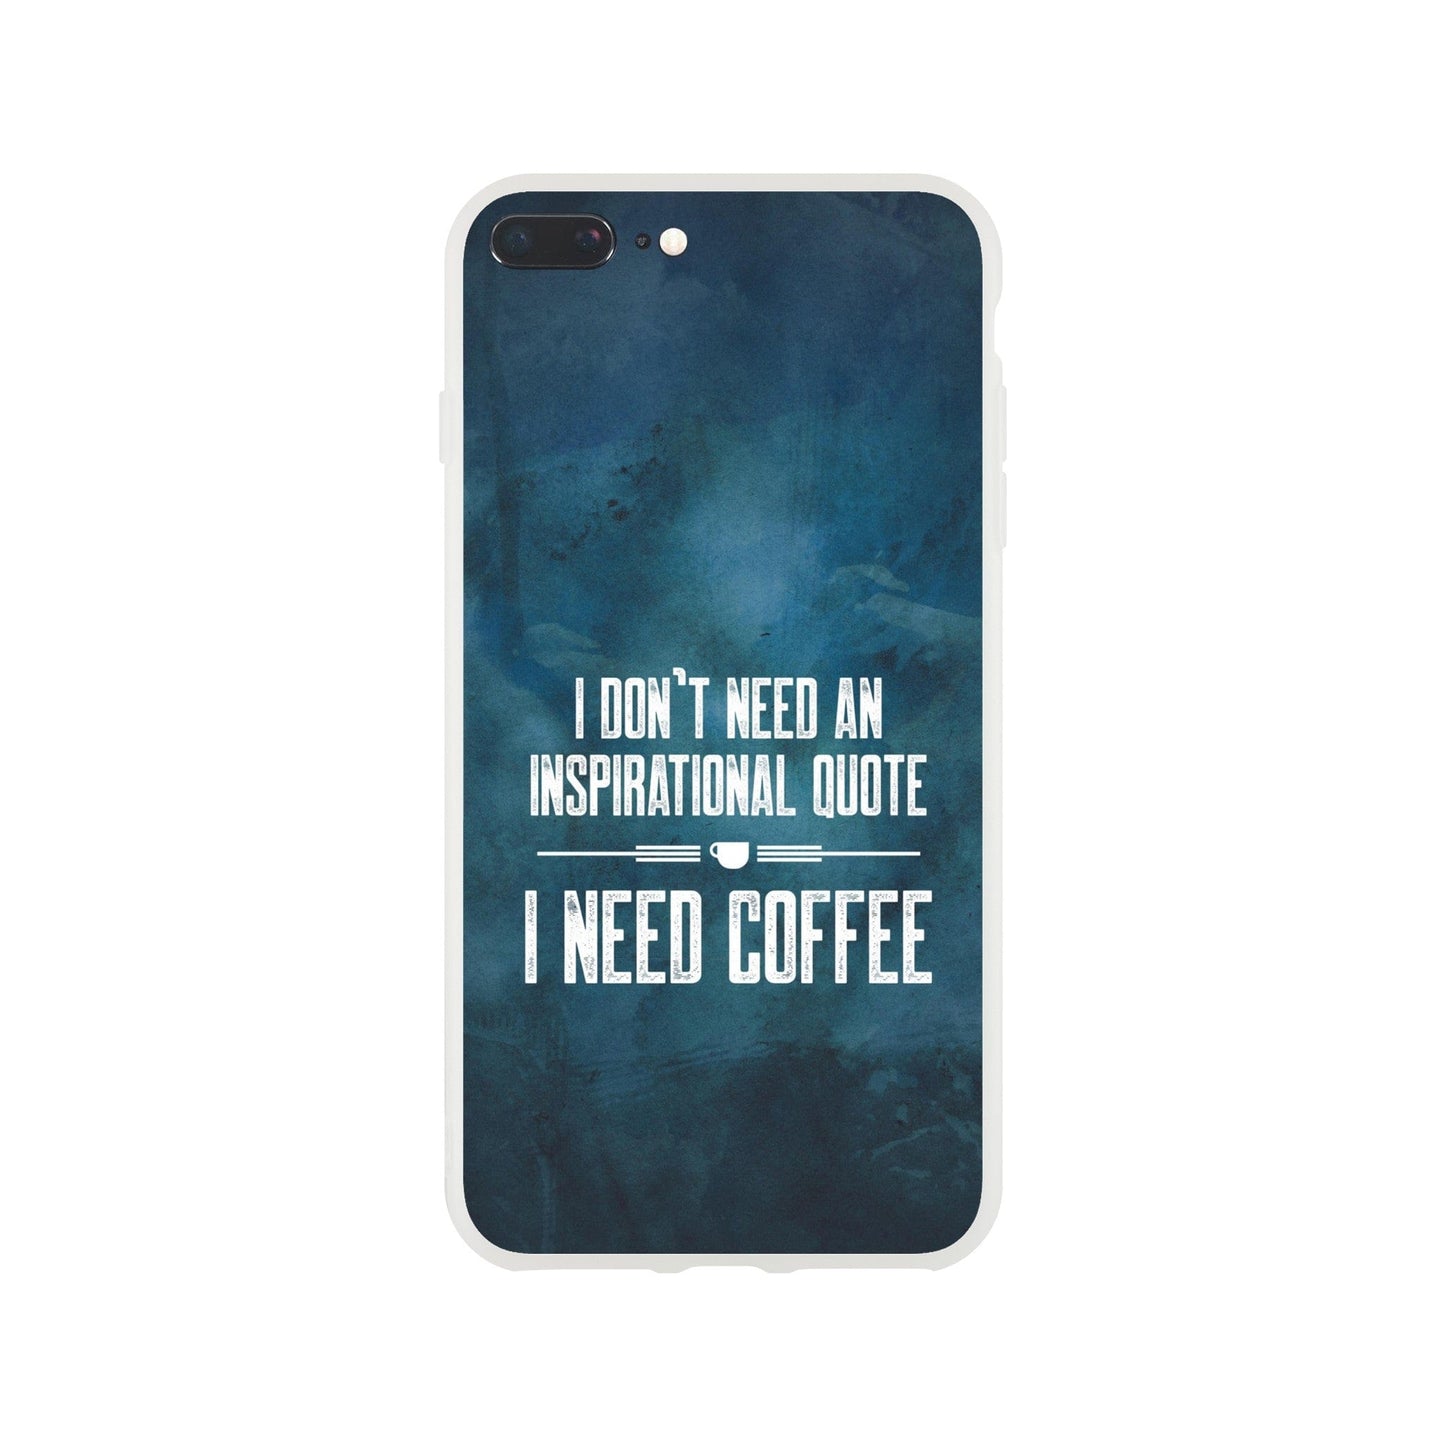 Good Bean Gifts "Coffee not Quotes" Flexi Cell Phone Case iPhone 7 Plus